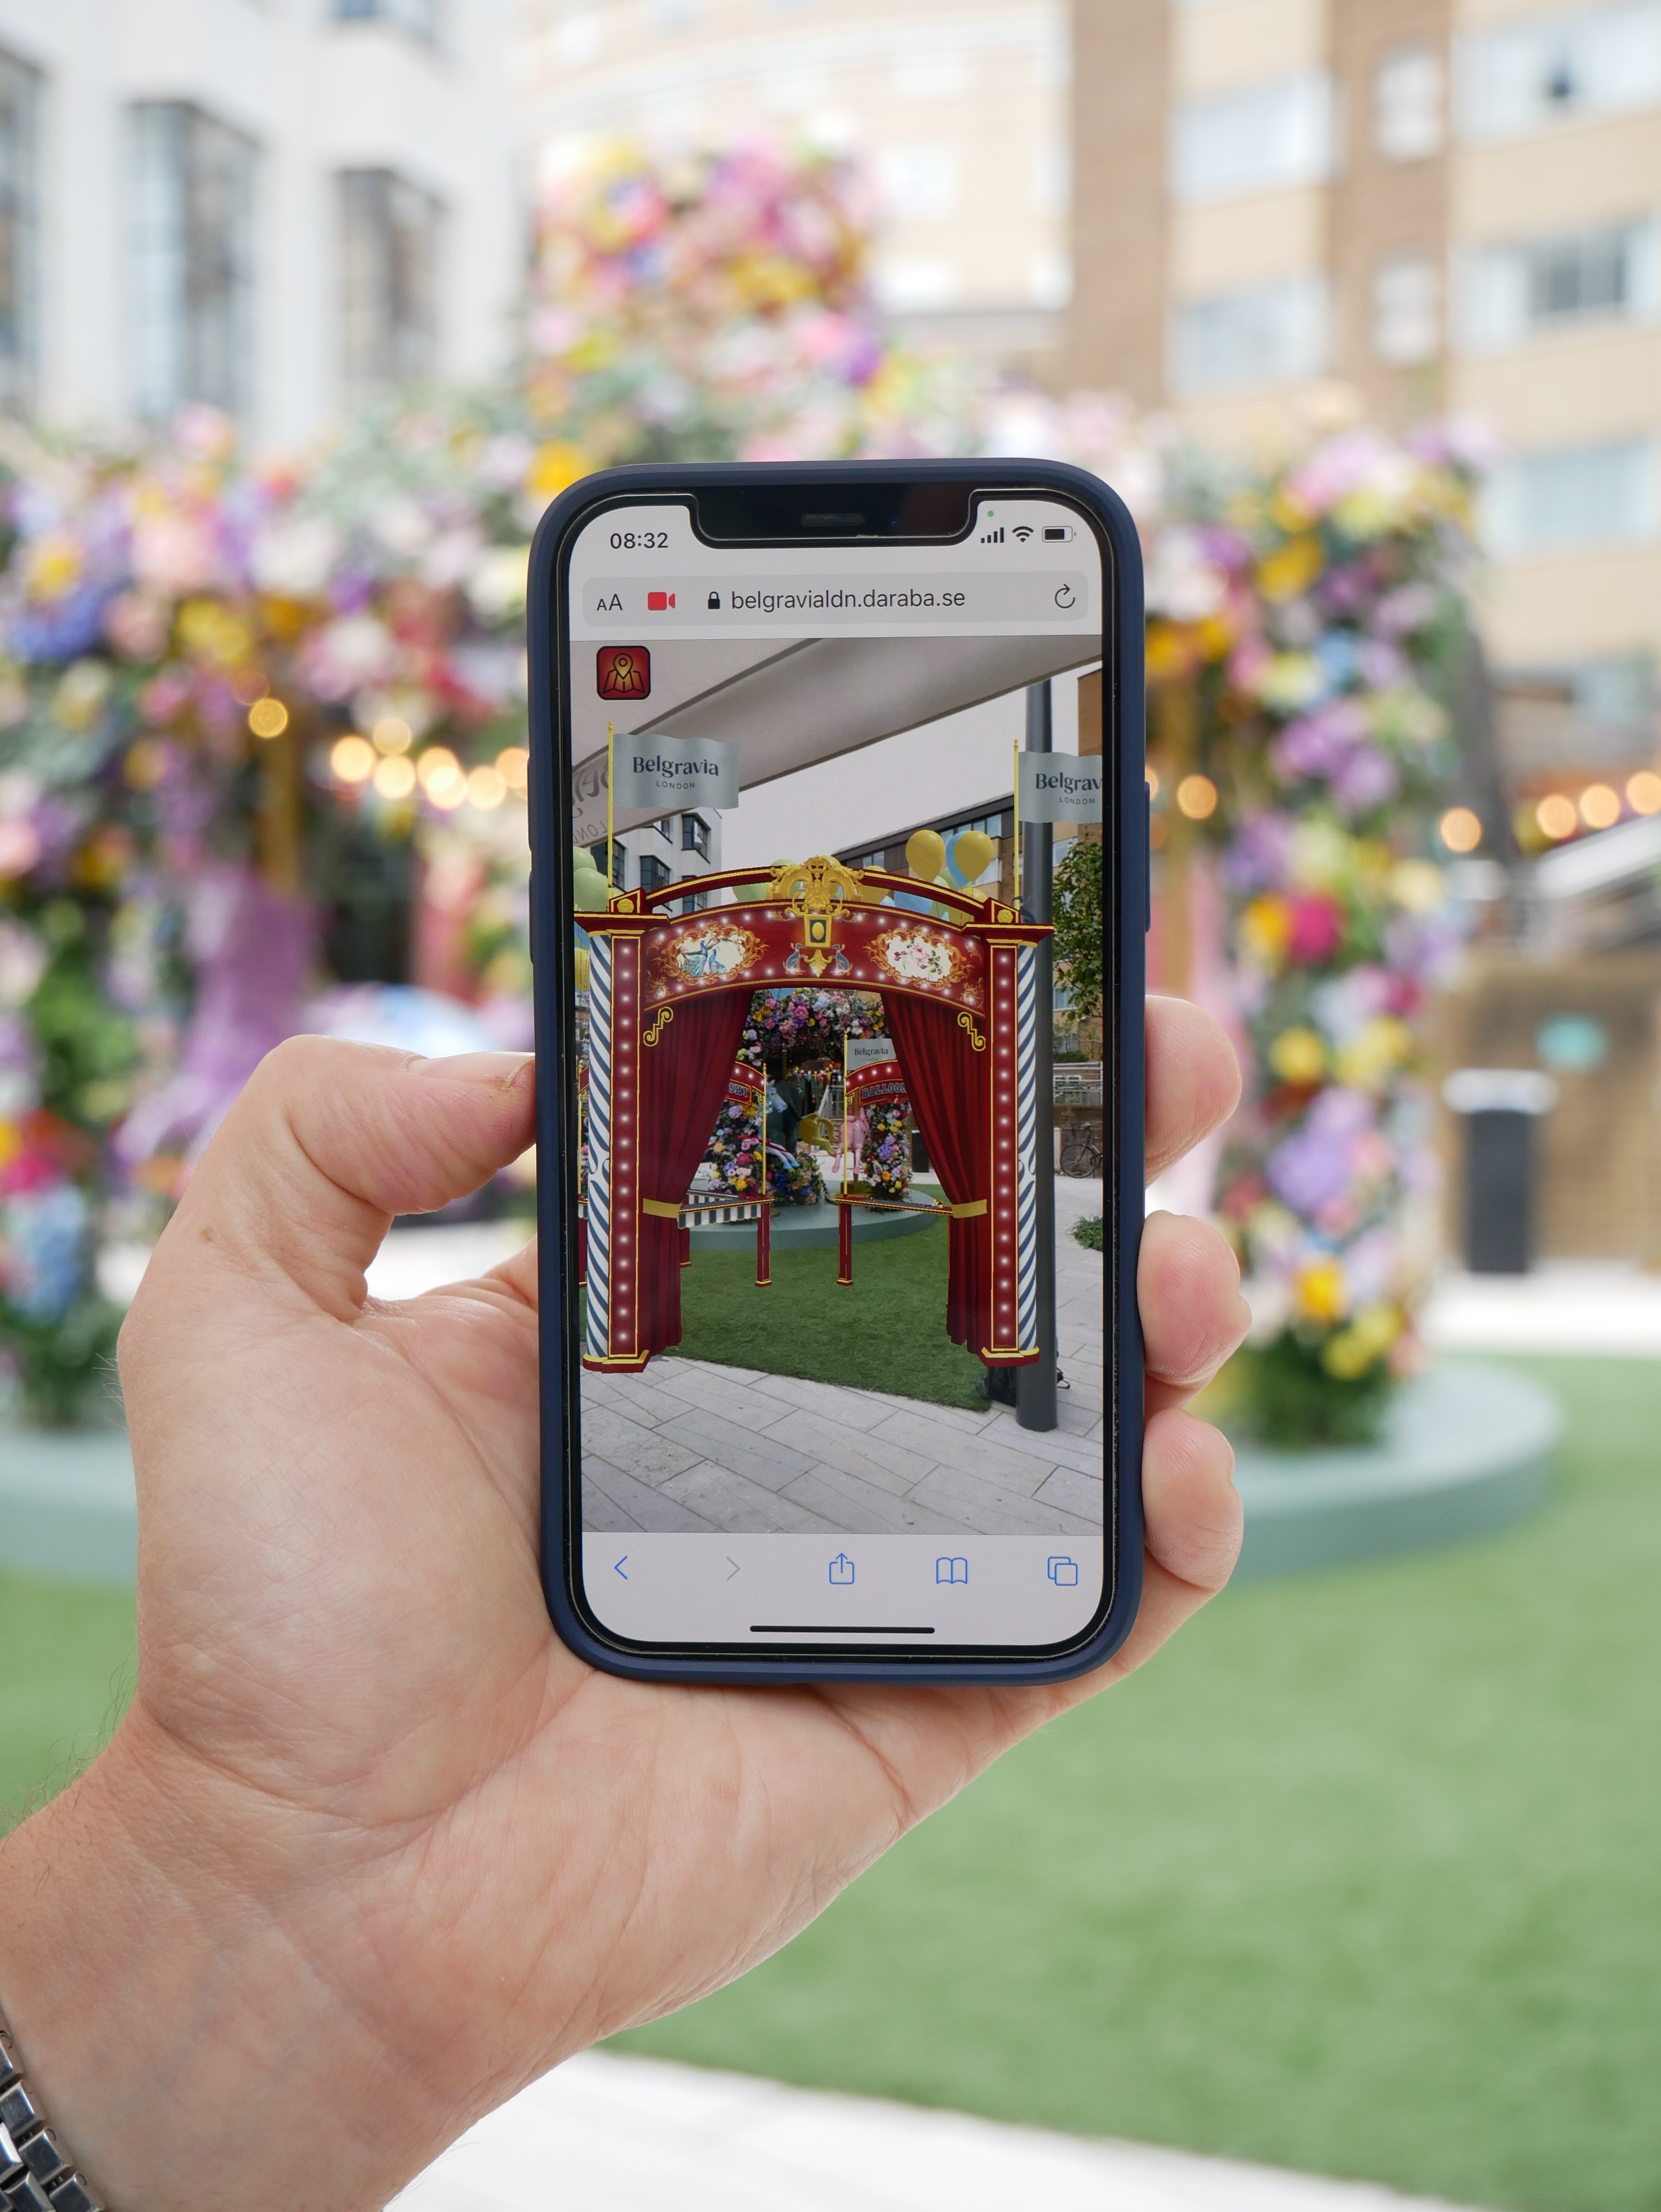 Grosvenor and Darabase have partnered to create 11 AR experiences and an interactive map to guide and delight visitors to Belgravia in Bloom 2021